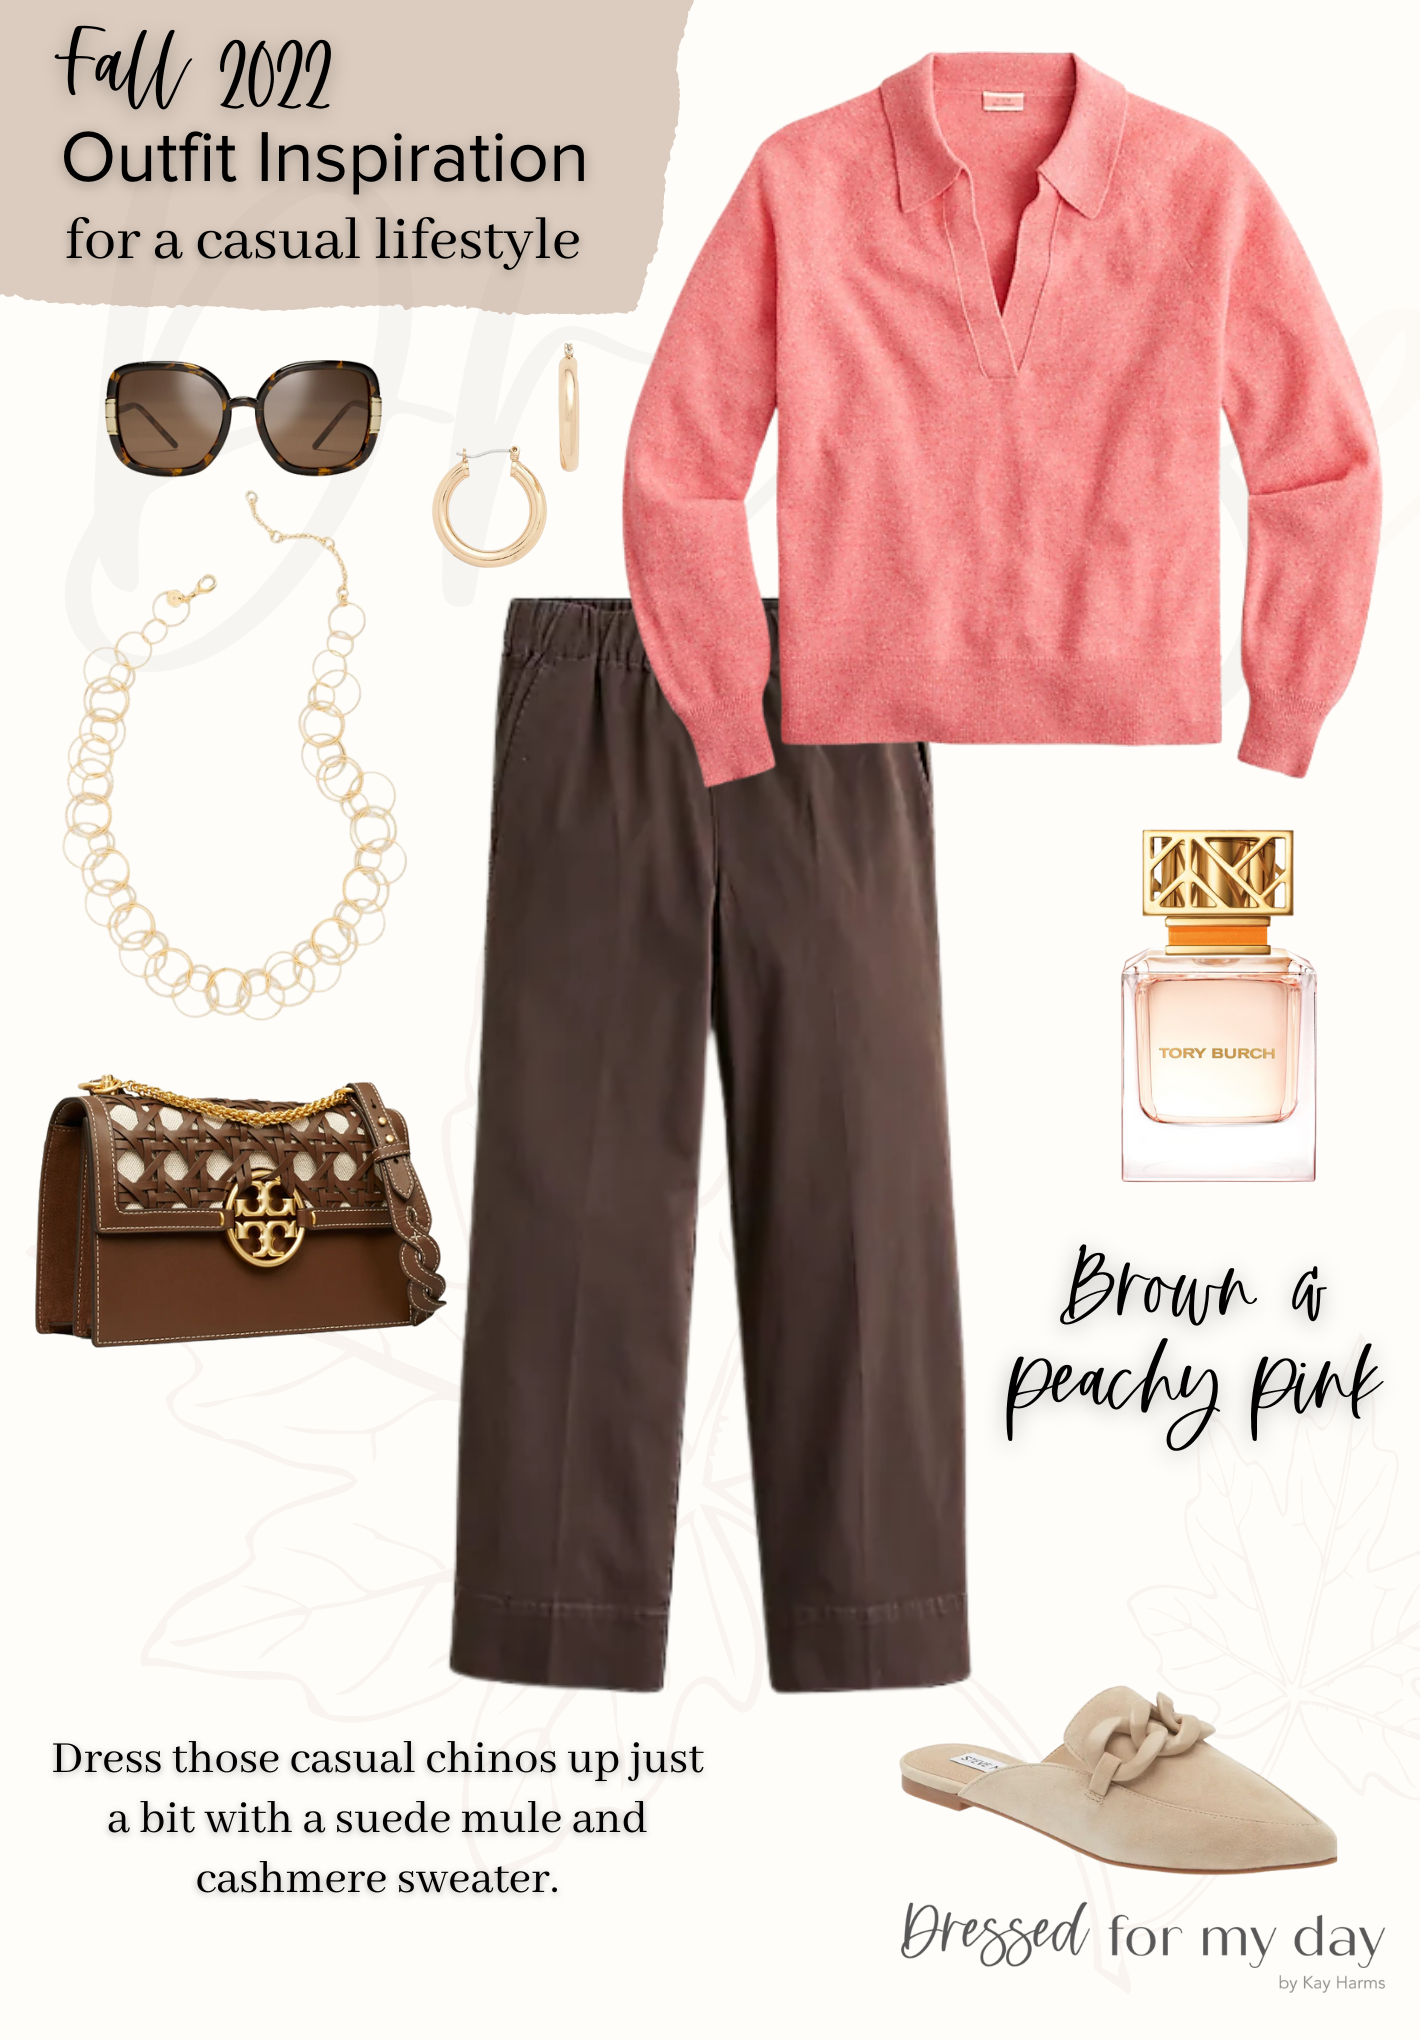 Brown and Pink